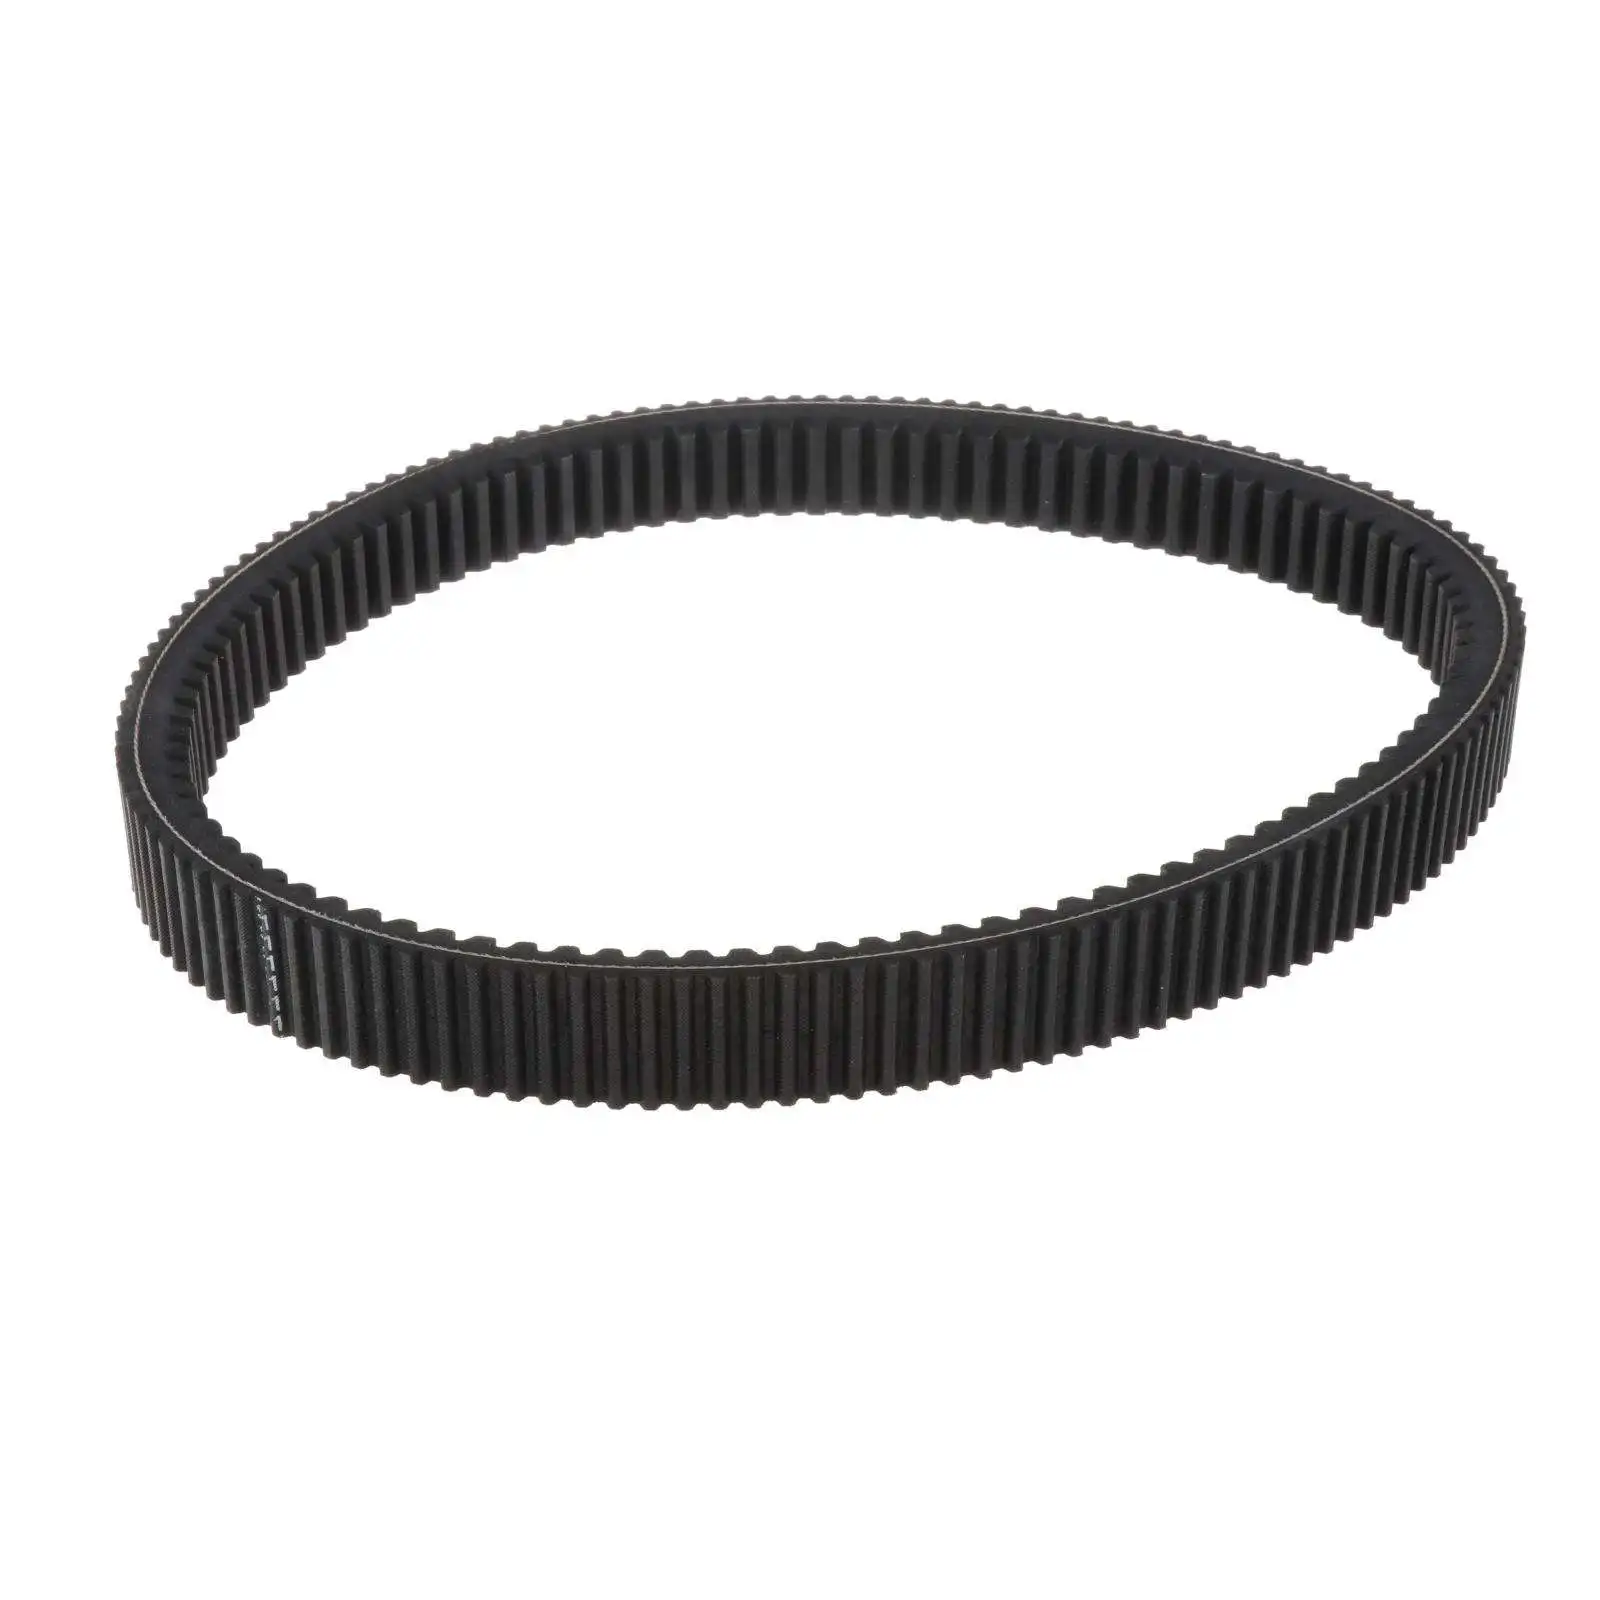 New Snowmobile Performance Drive Belt Double-Sided Replacement 417300571 for Ski-Doo 850 E-TEC